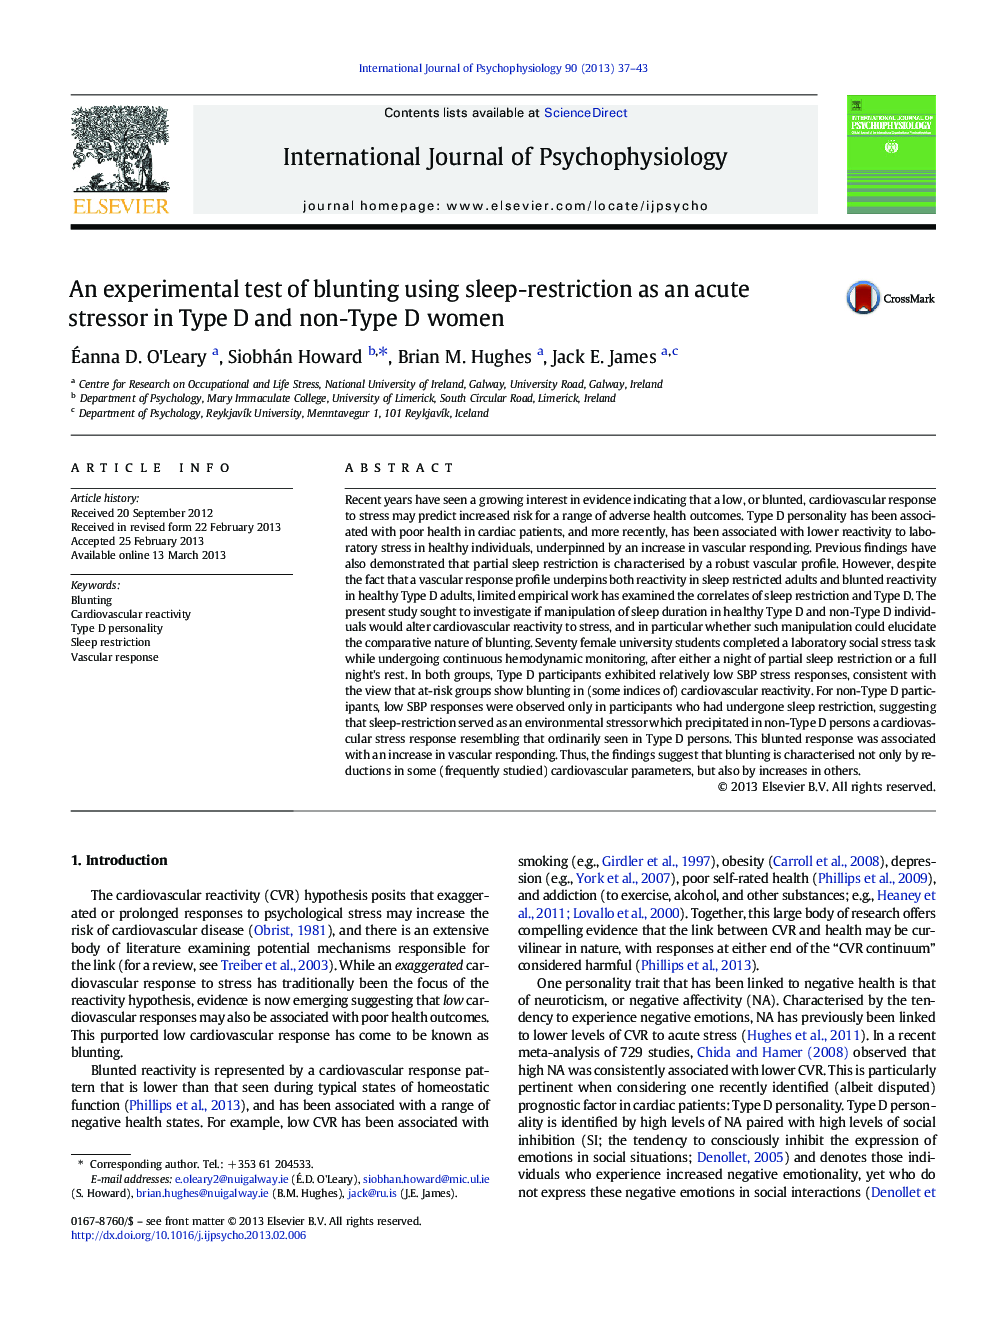 An experimental test of blunting using sleep-restriction as an acute stressor in Type D and non-Type D women